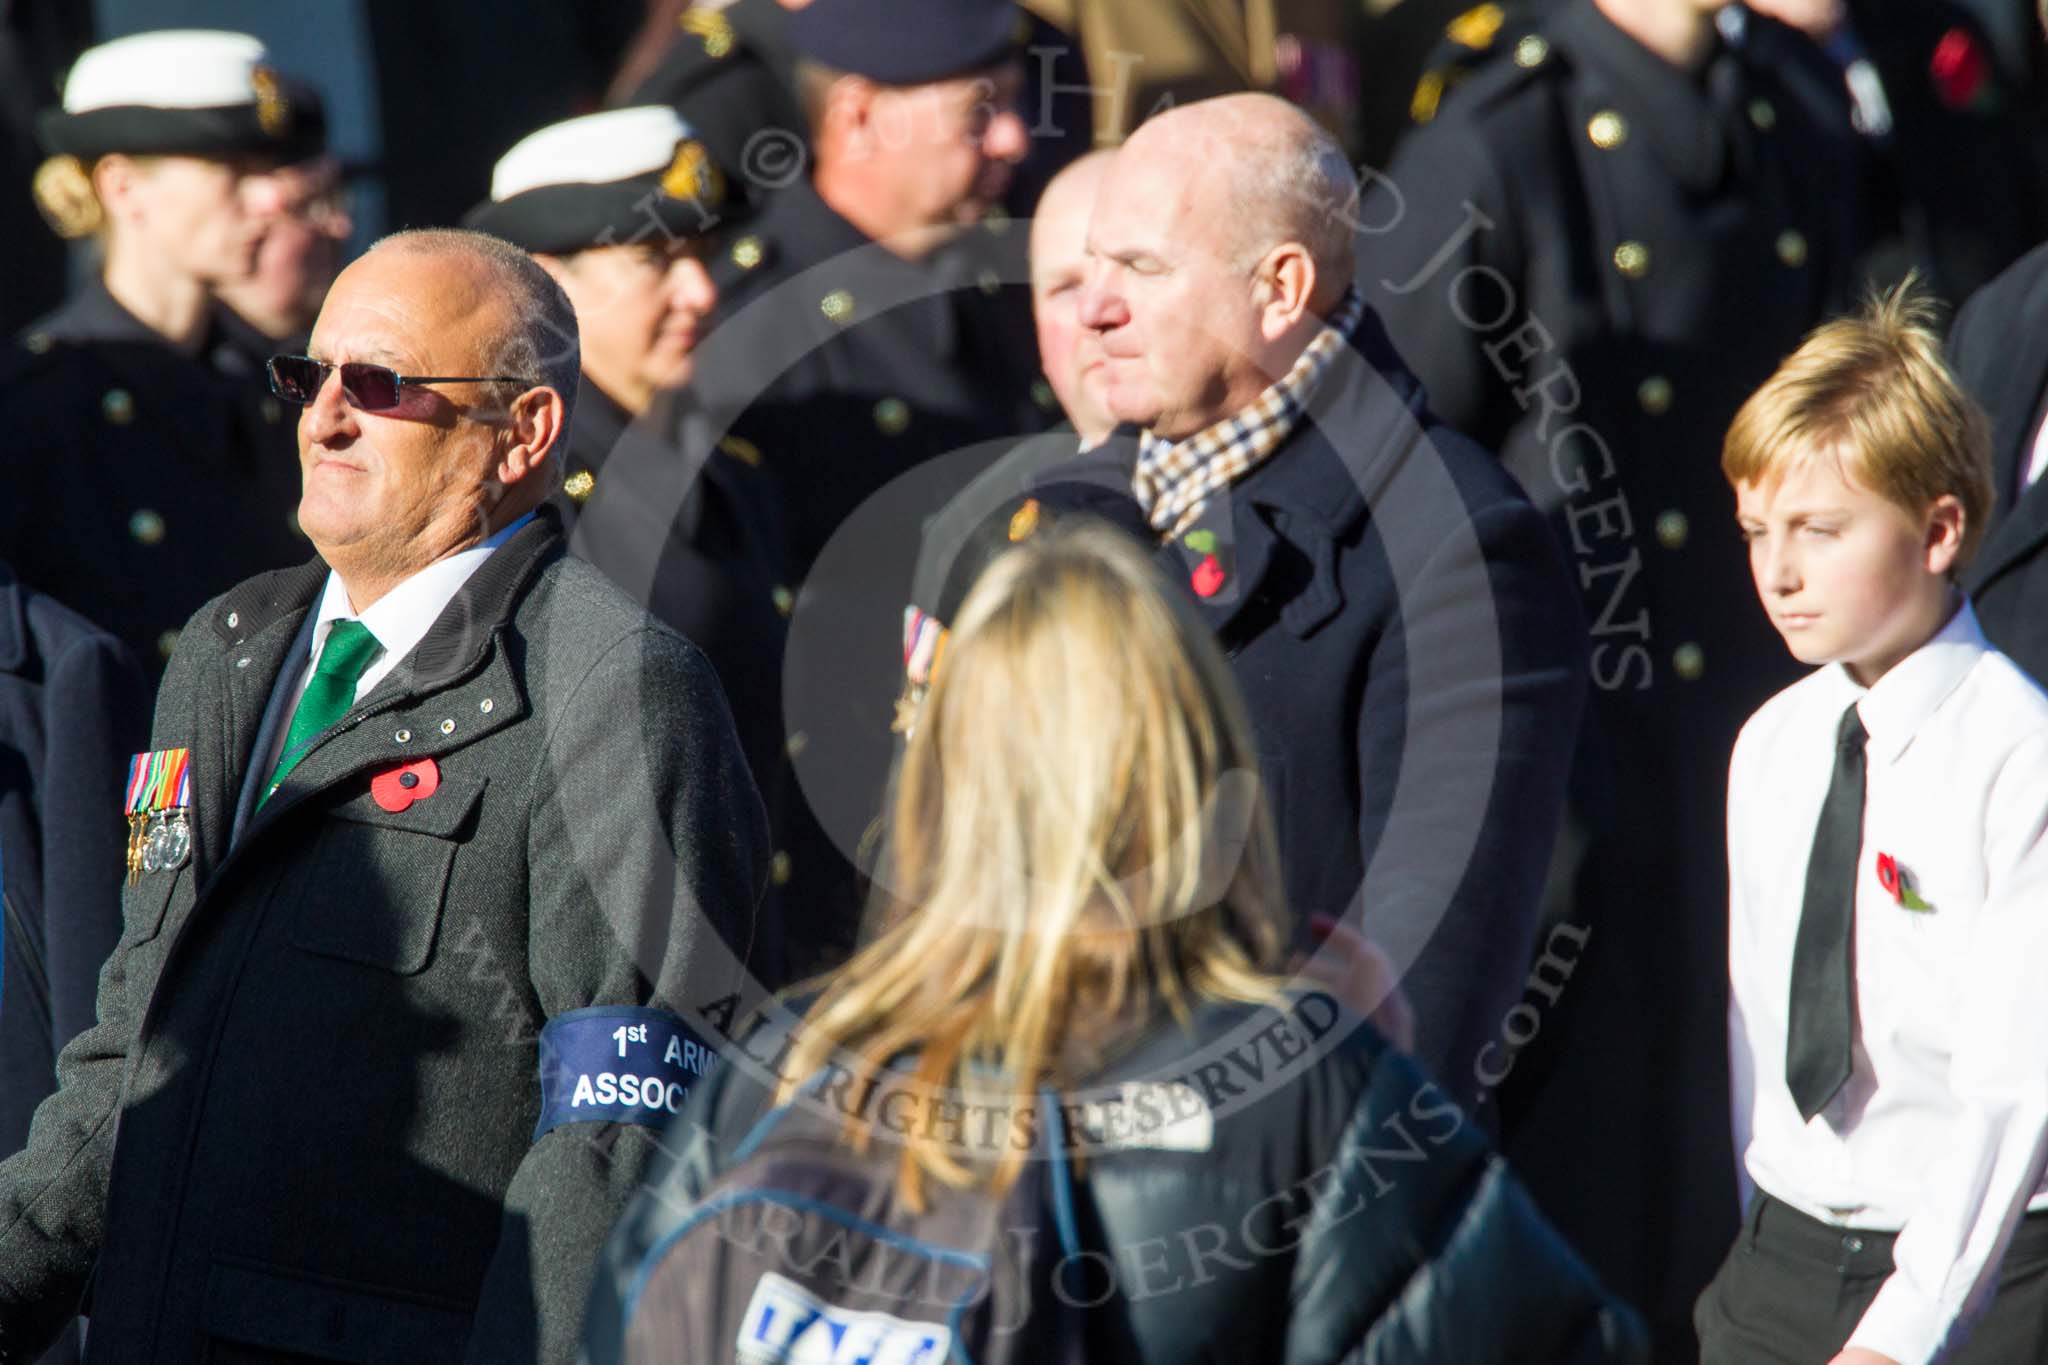 Remembrance Sunday at the Cenotaph in London 2014: Group F19 - 1st Army Association.
Press stand opposite the Foreign Office building, Whitehall, London SW1,
London,
Greater London,
United Kingdom,
on 09 November 2014 at 11:59, image #1096